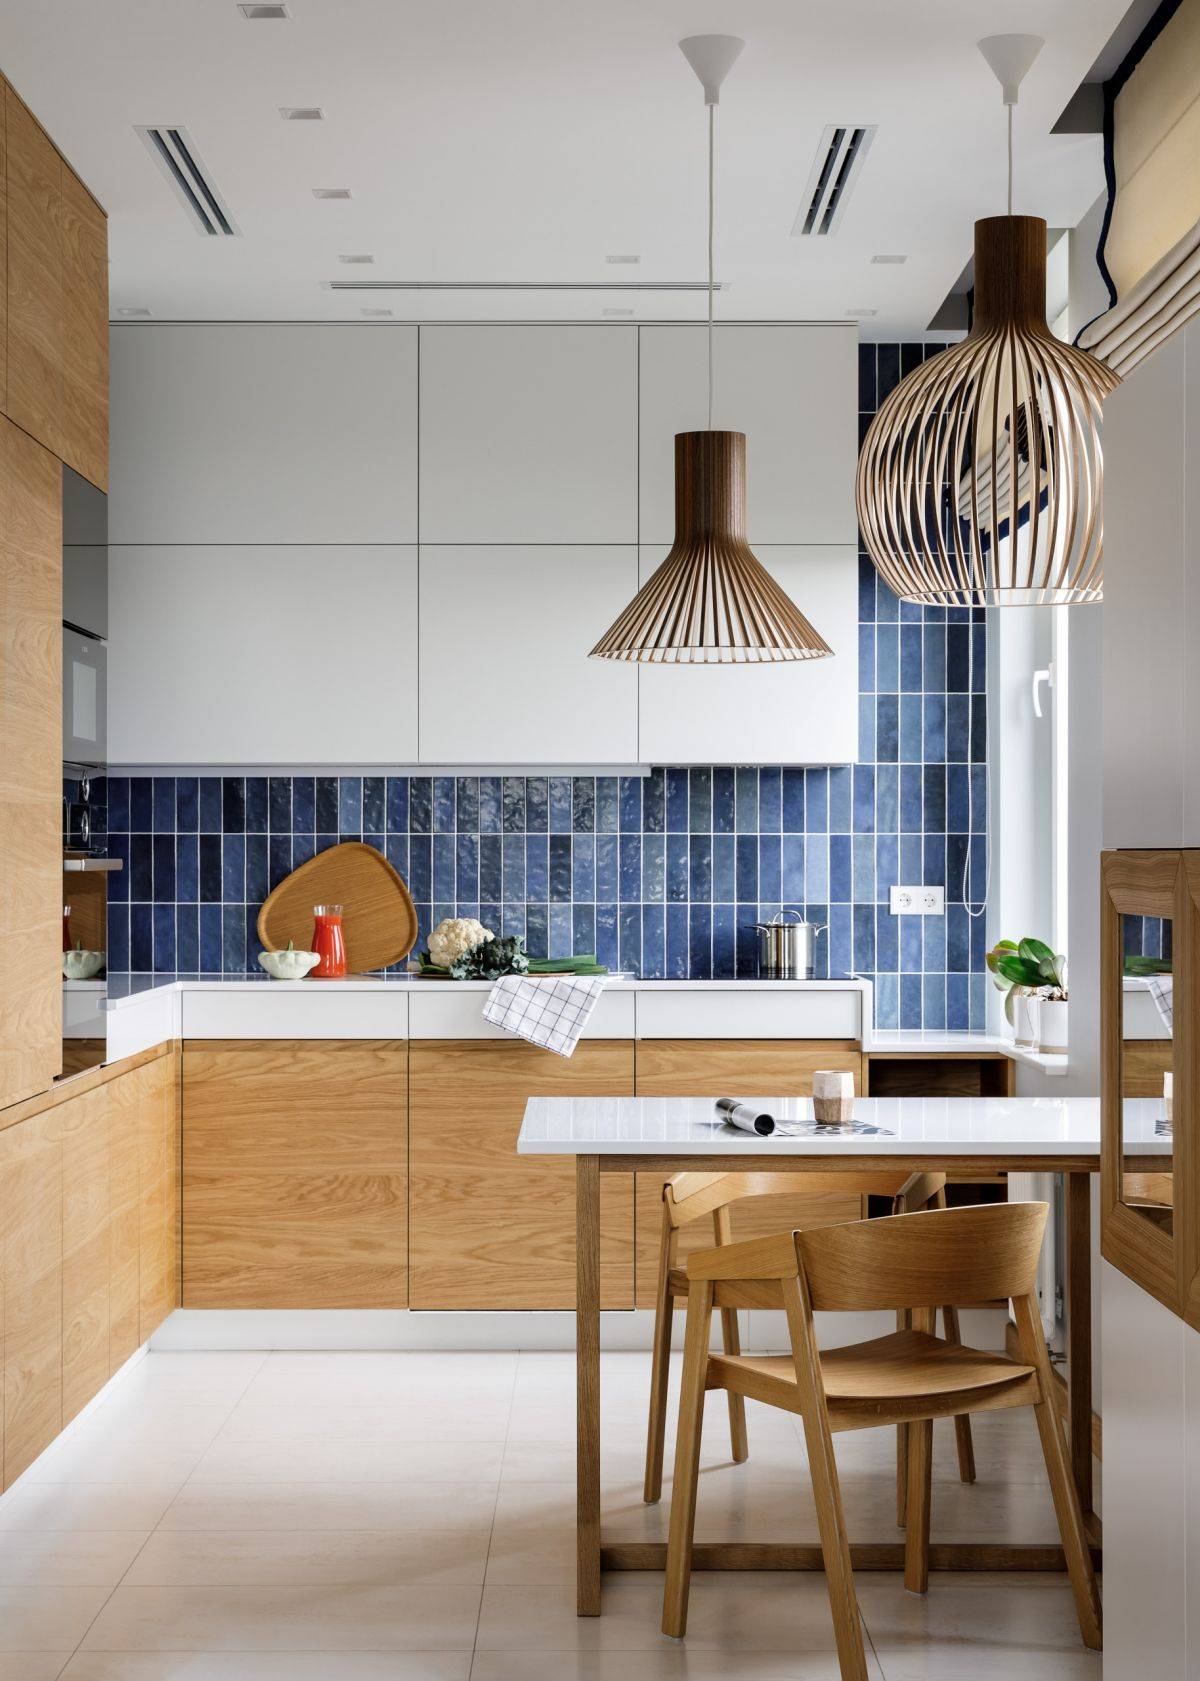 Backsplash with vertical tile pattern in blue is perfect for the trendy modern, neutral kitchen